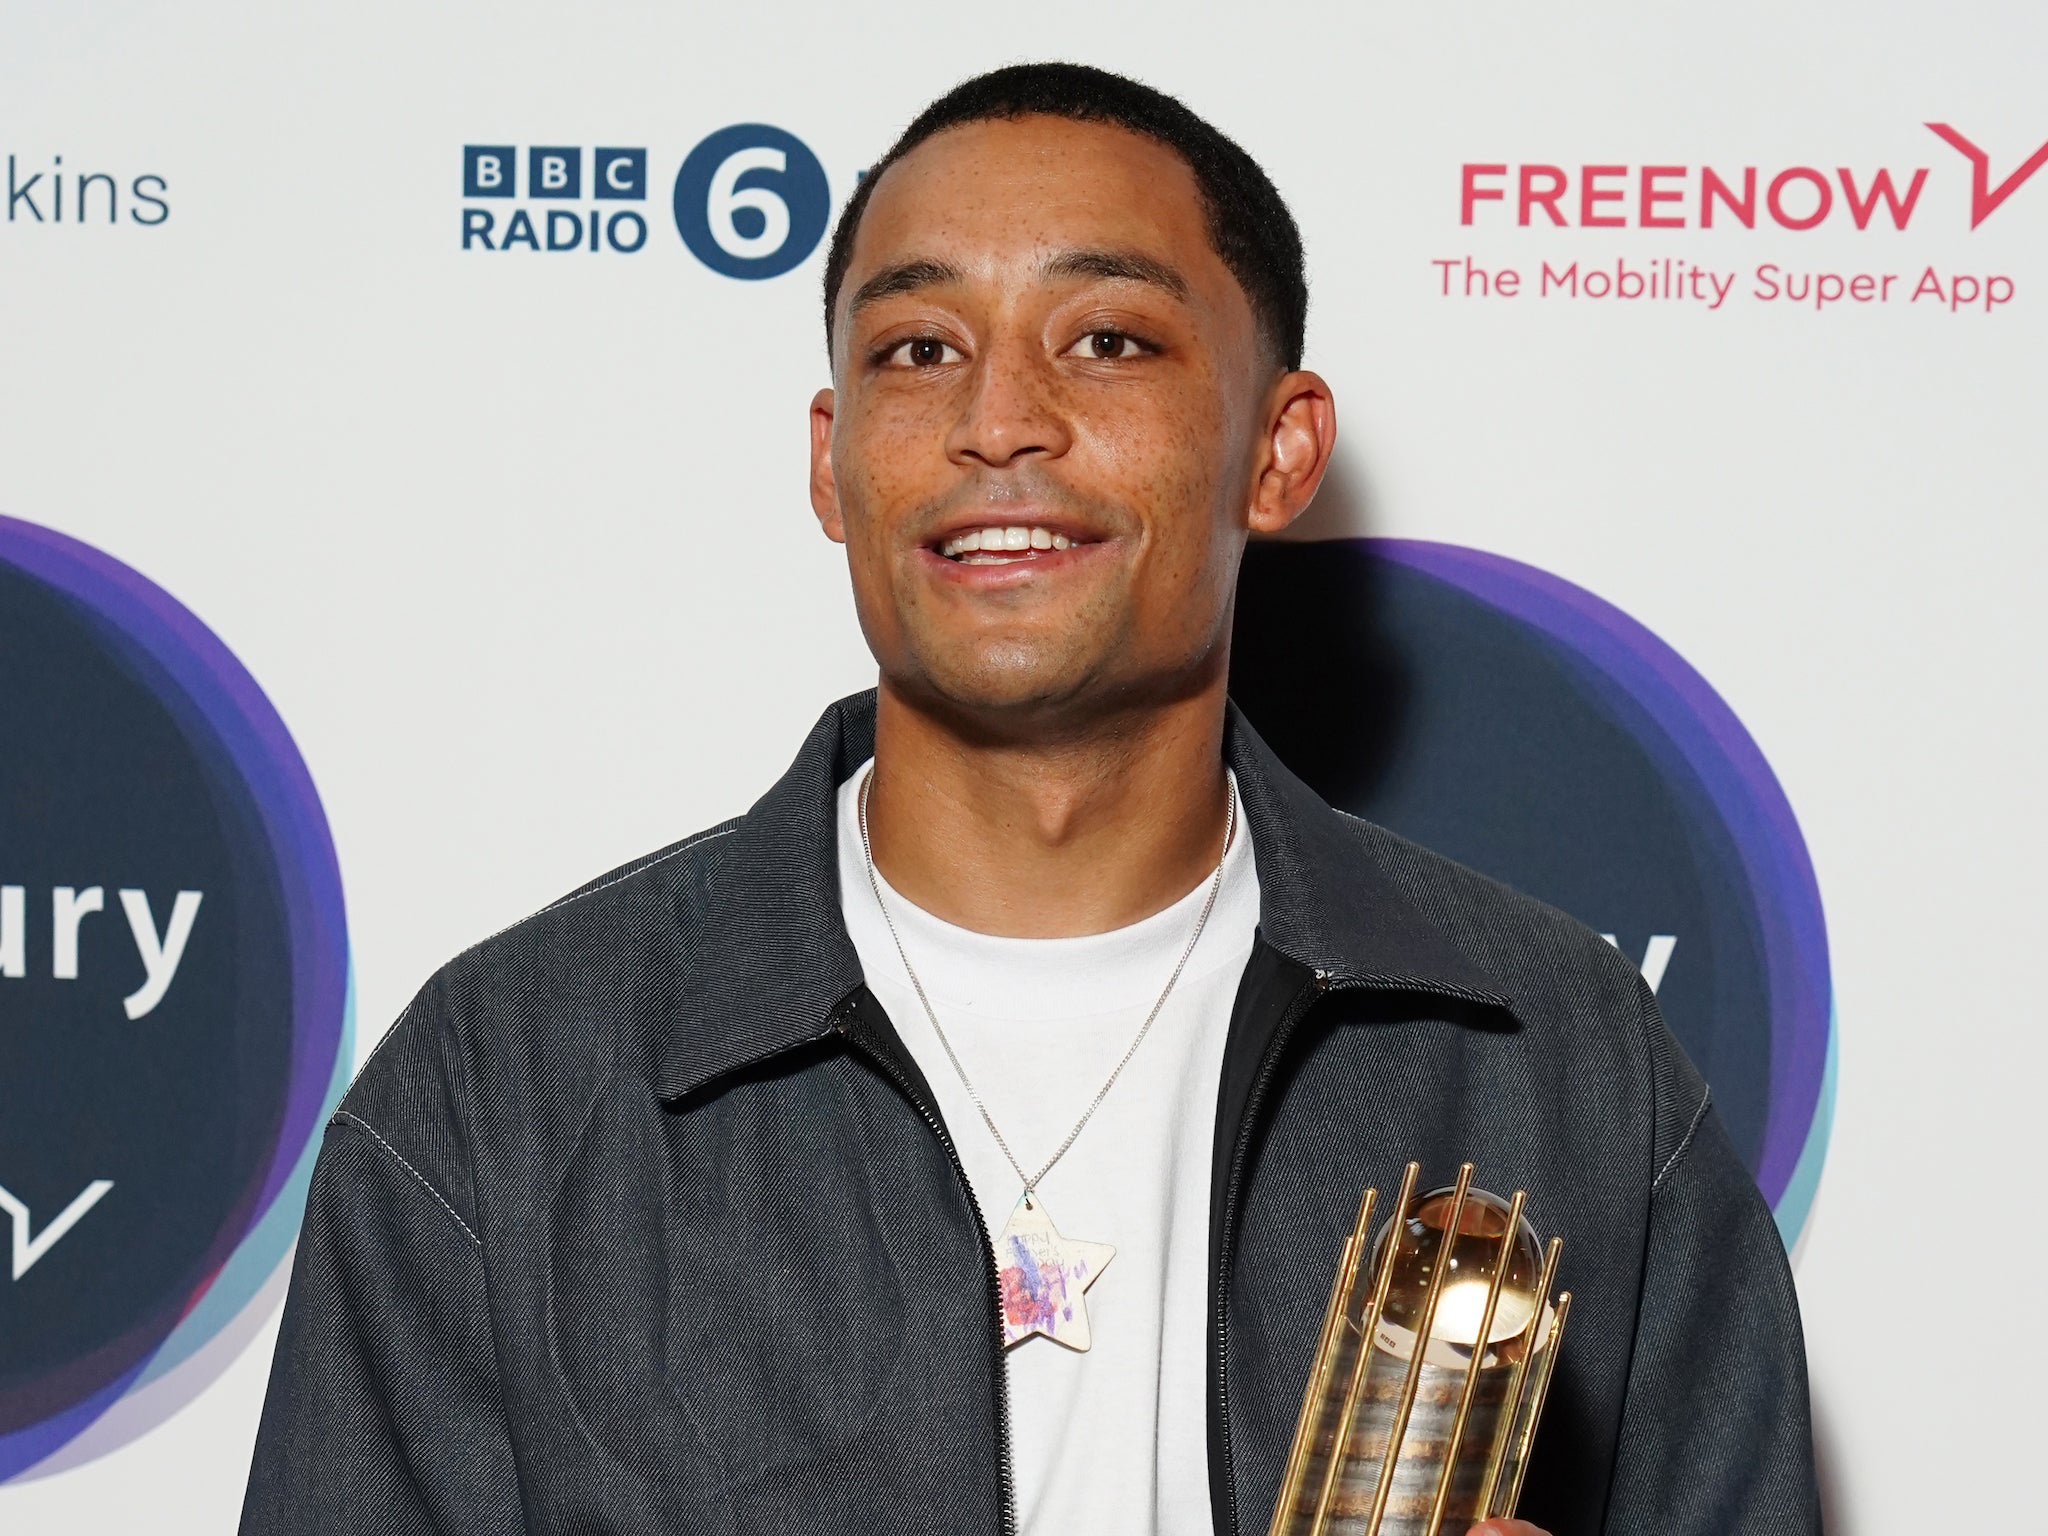 London hip-hop artist Loyle Carner was among the favourites to win for his album ‘hugo’